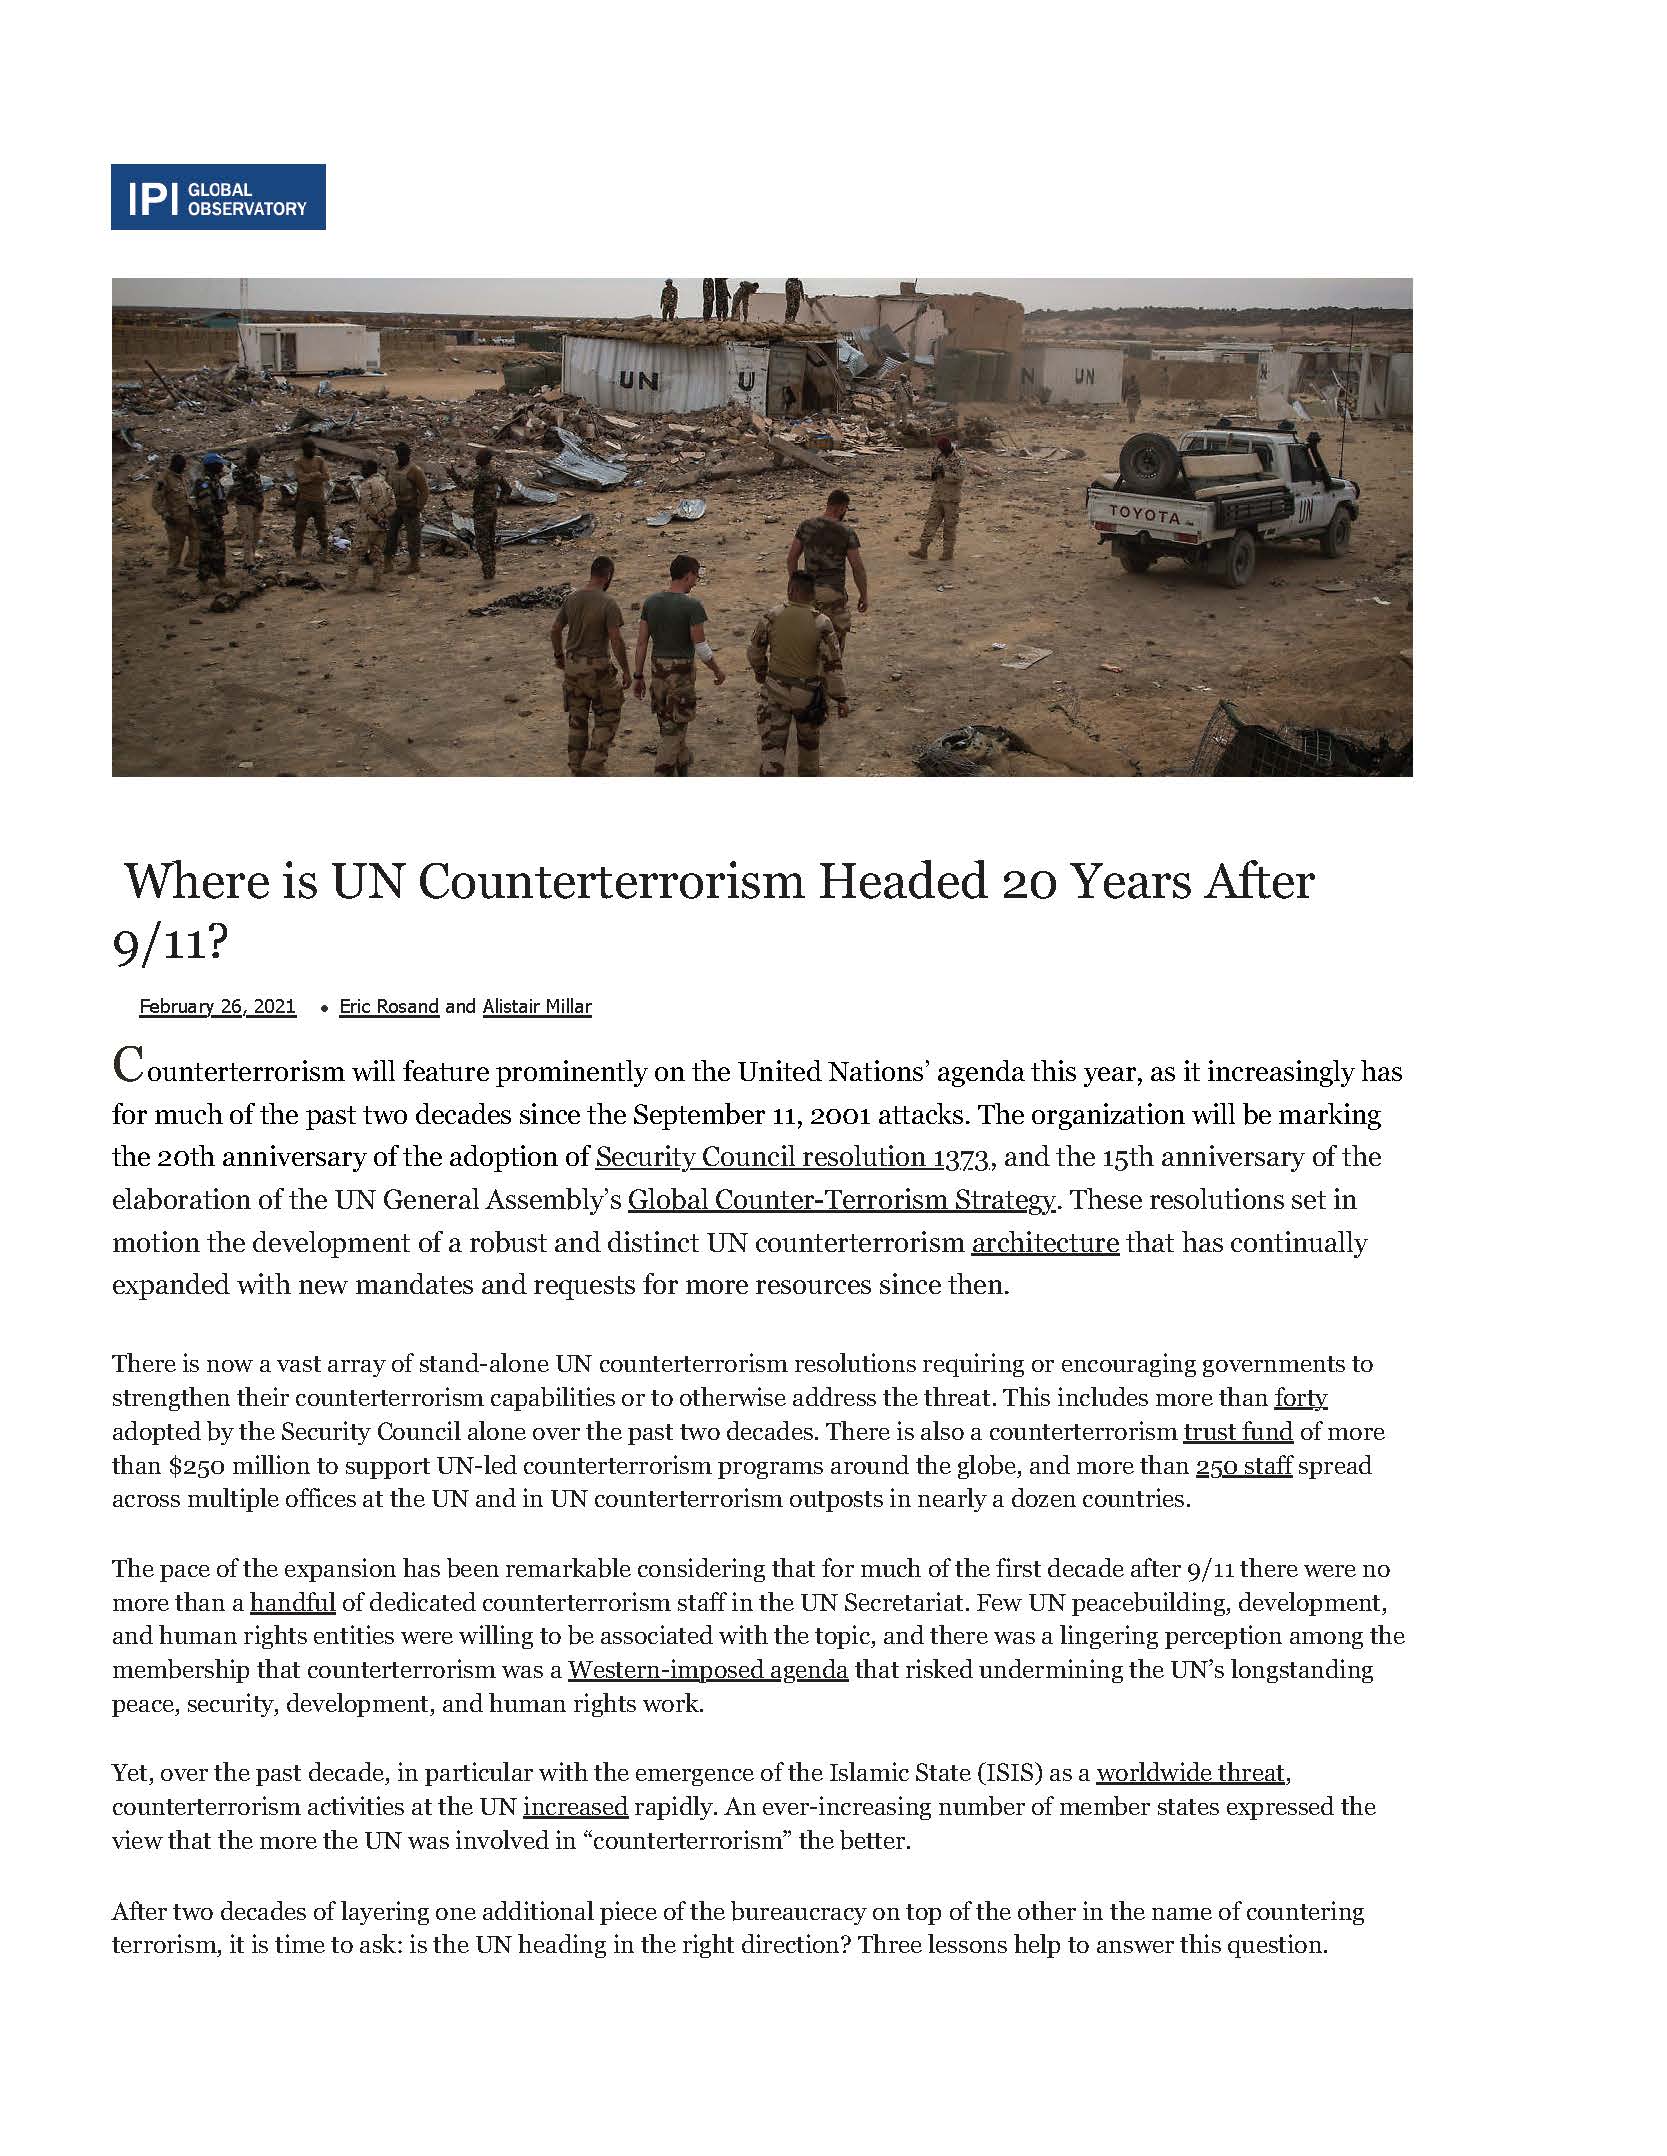 Where is UN Counterterrorism Headed 20 Years After 9/11?